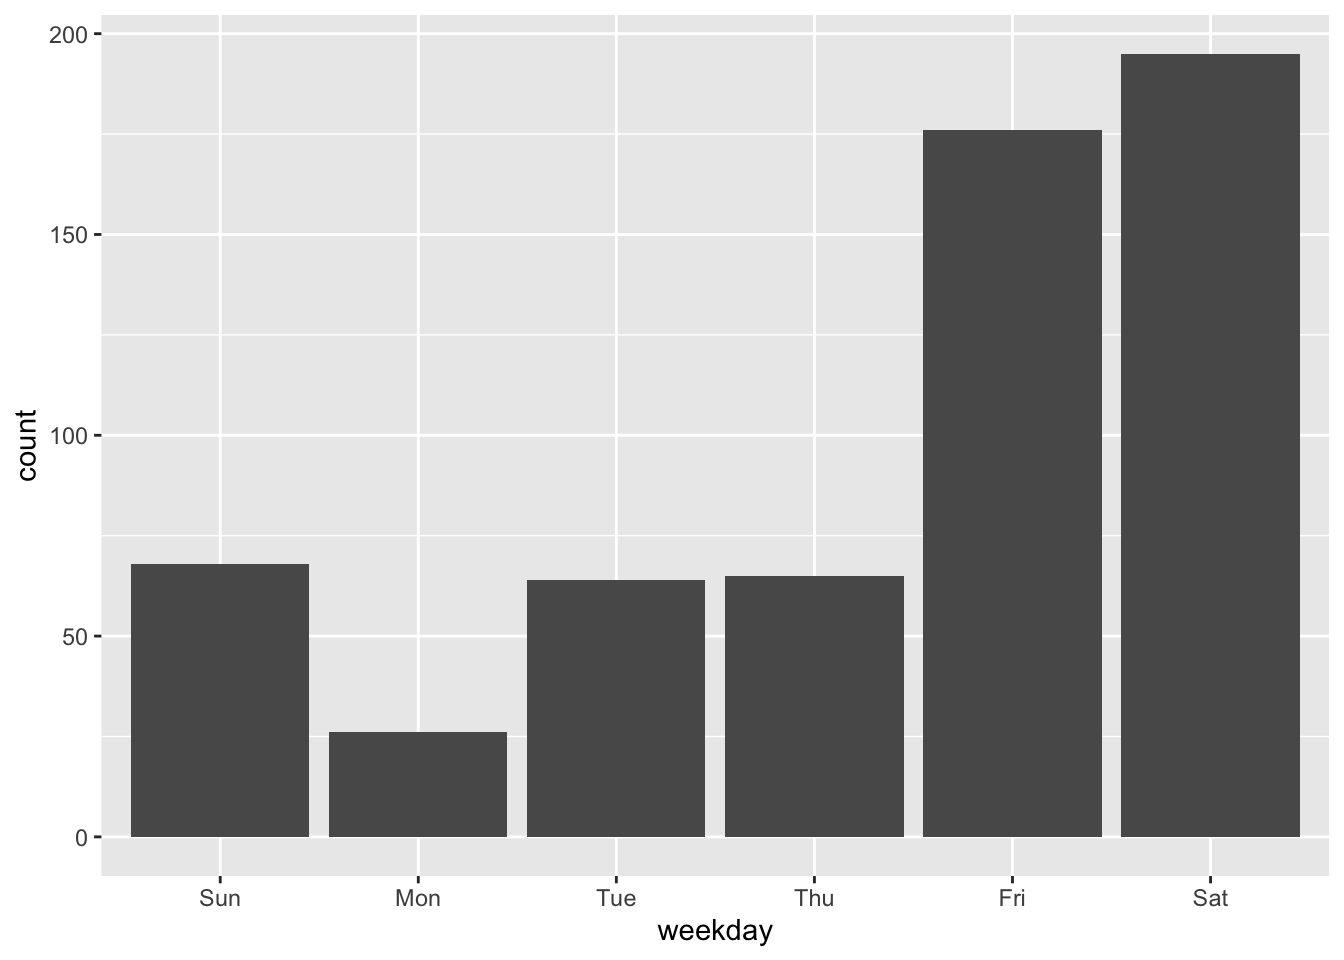 A ggplot bar plot with weekdays on the x axis and count of imports on the y axis. Most days have around 50 songs imported, but both Friday and Saturday have a count of around 175.